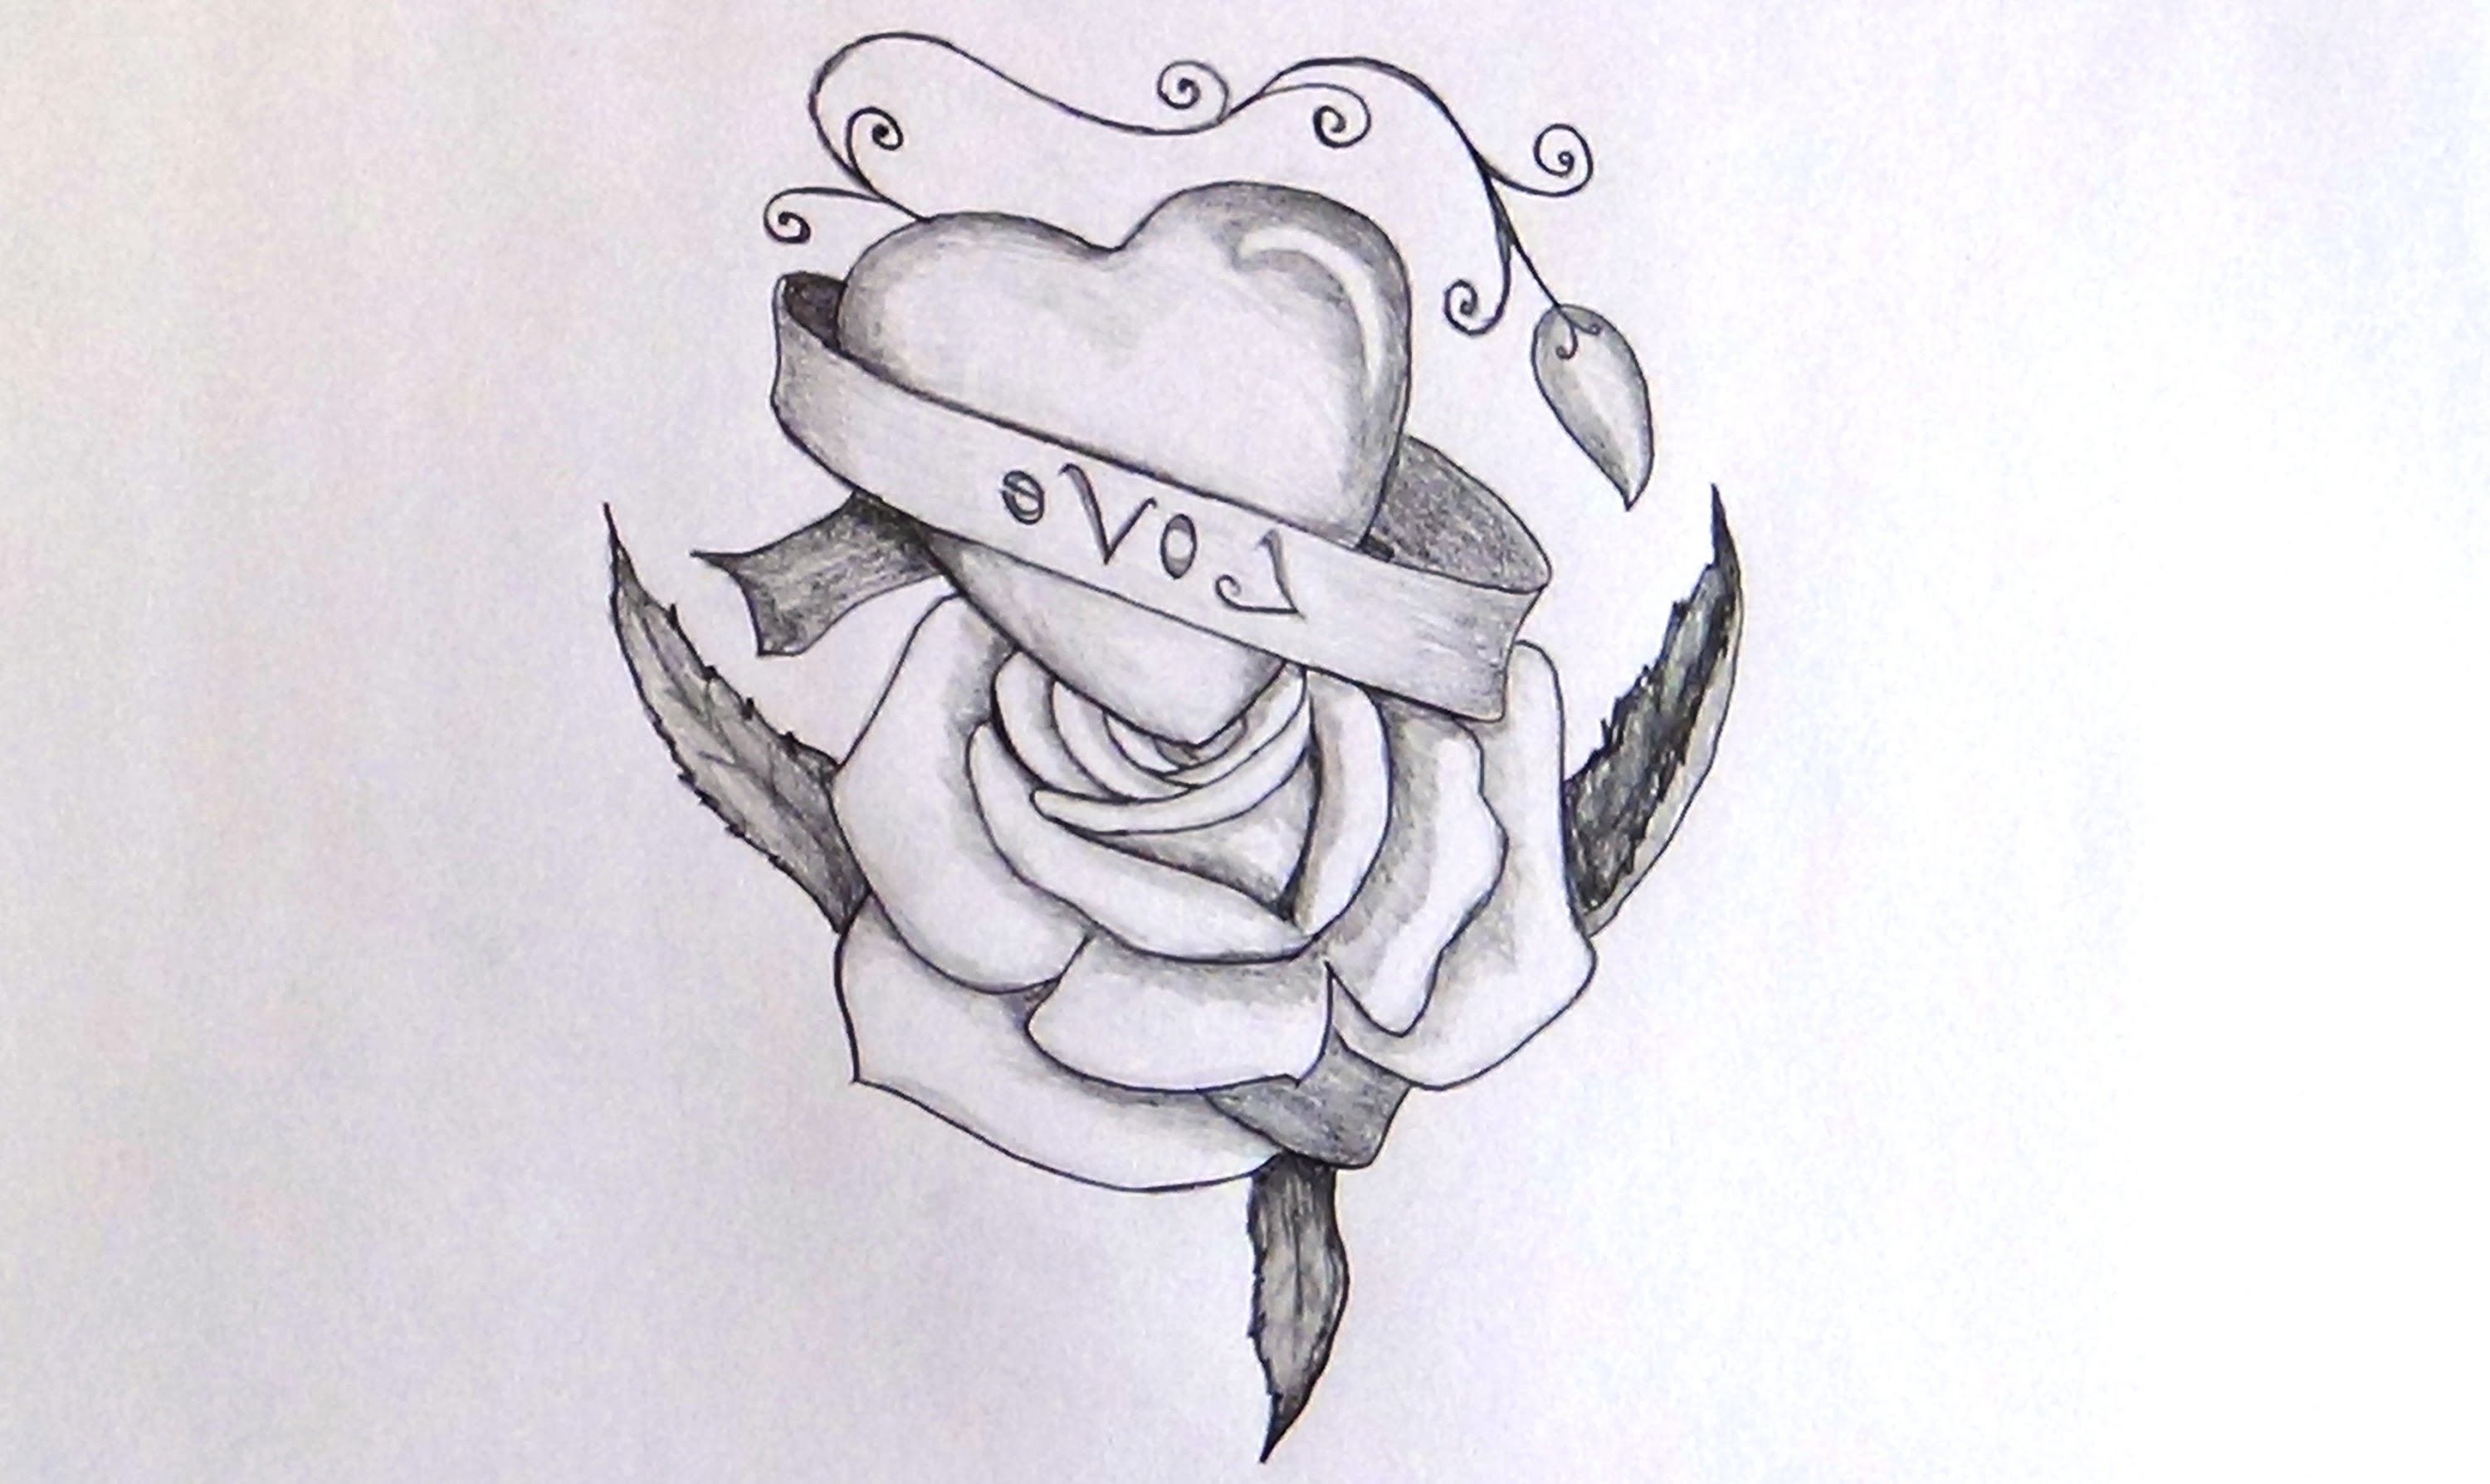 Pictures Of Hearts And Roses To Draw - Drawings Of Hearts And Roses. 